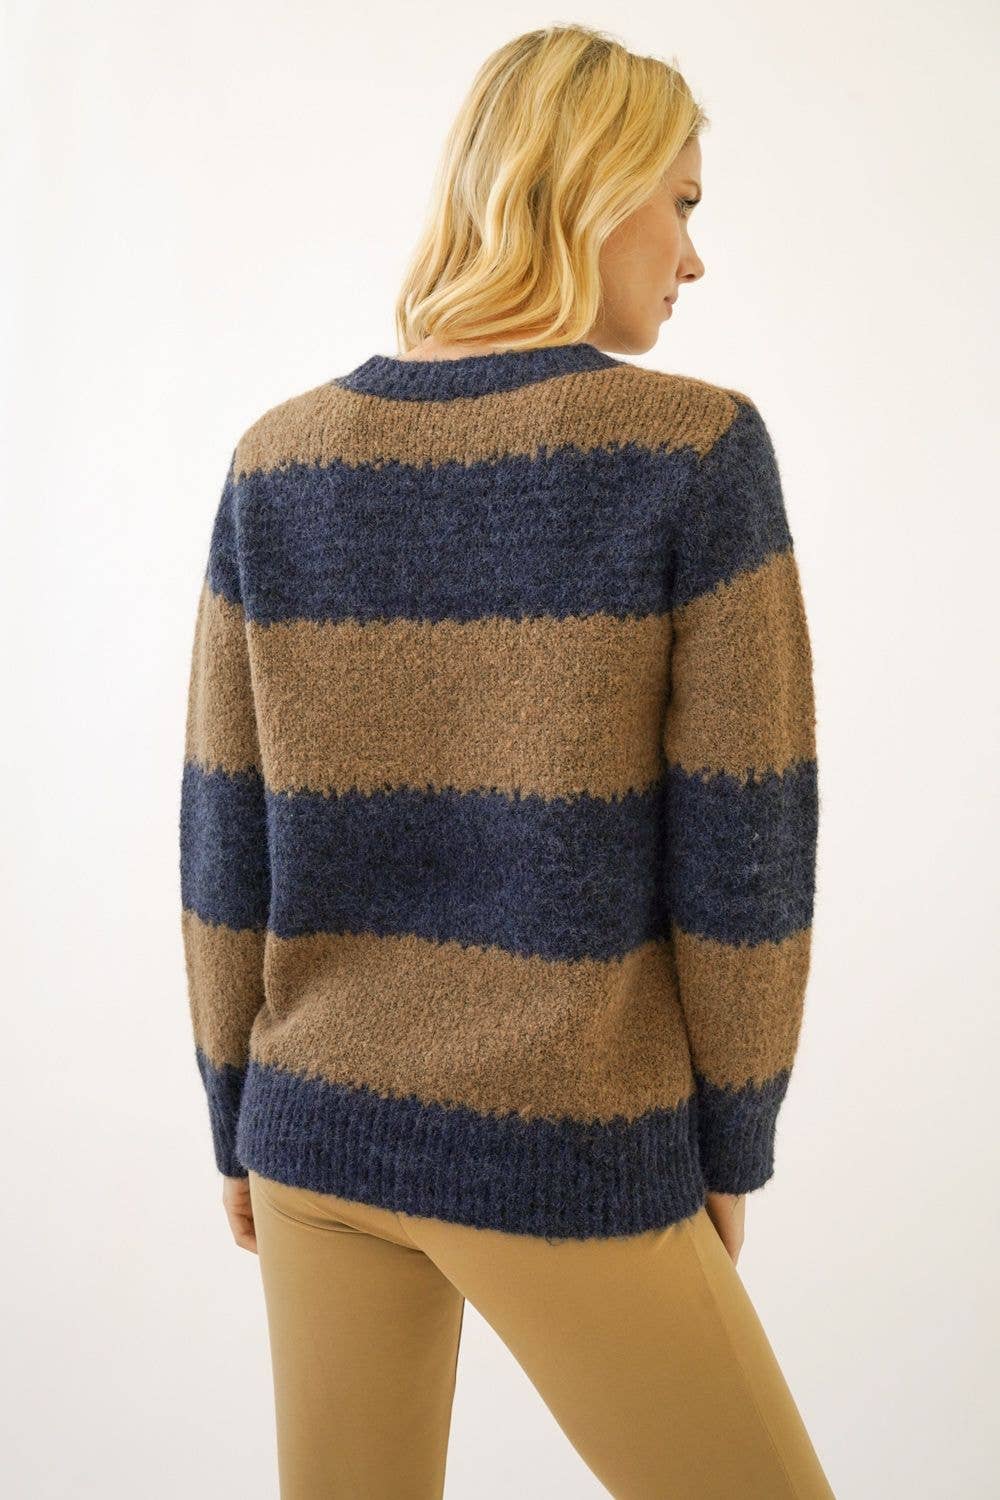 Navy and Brown Stripe Sweater